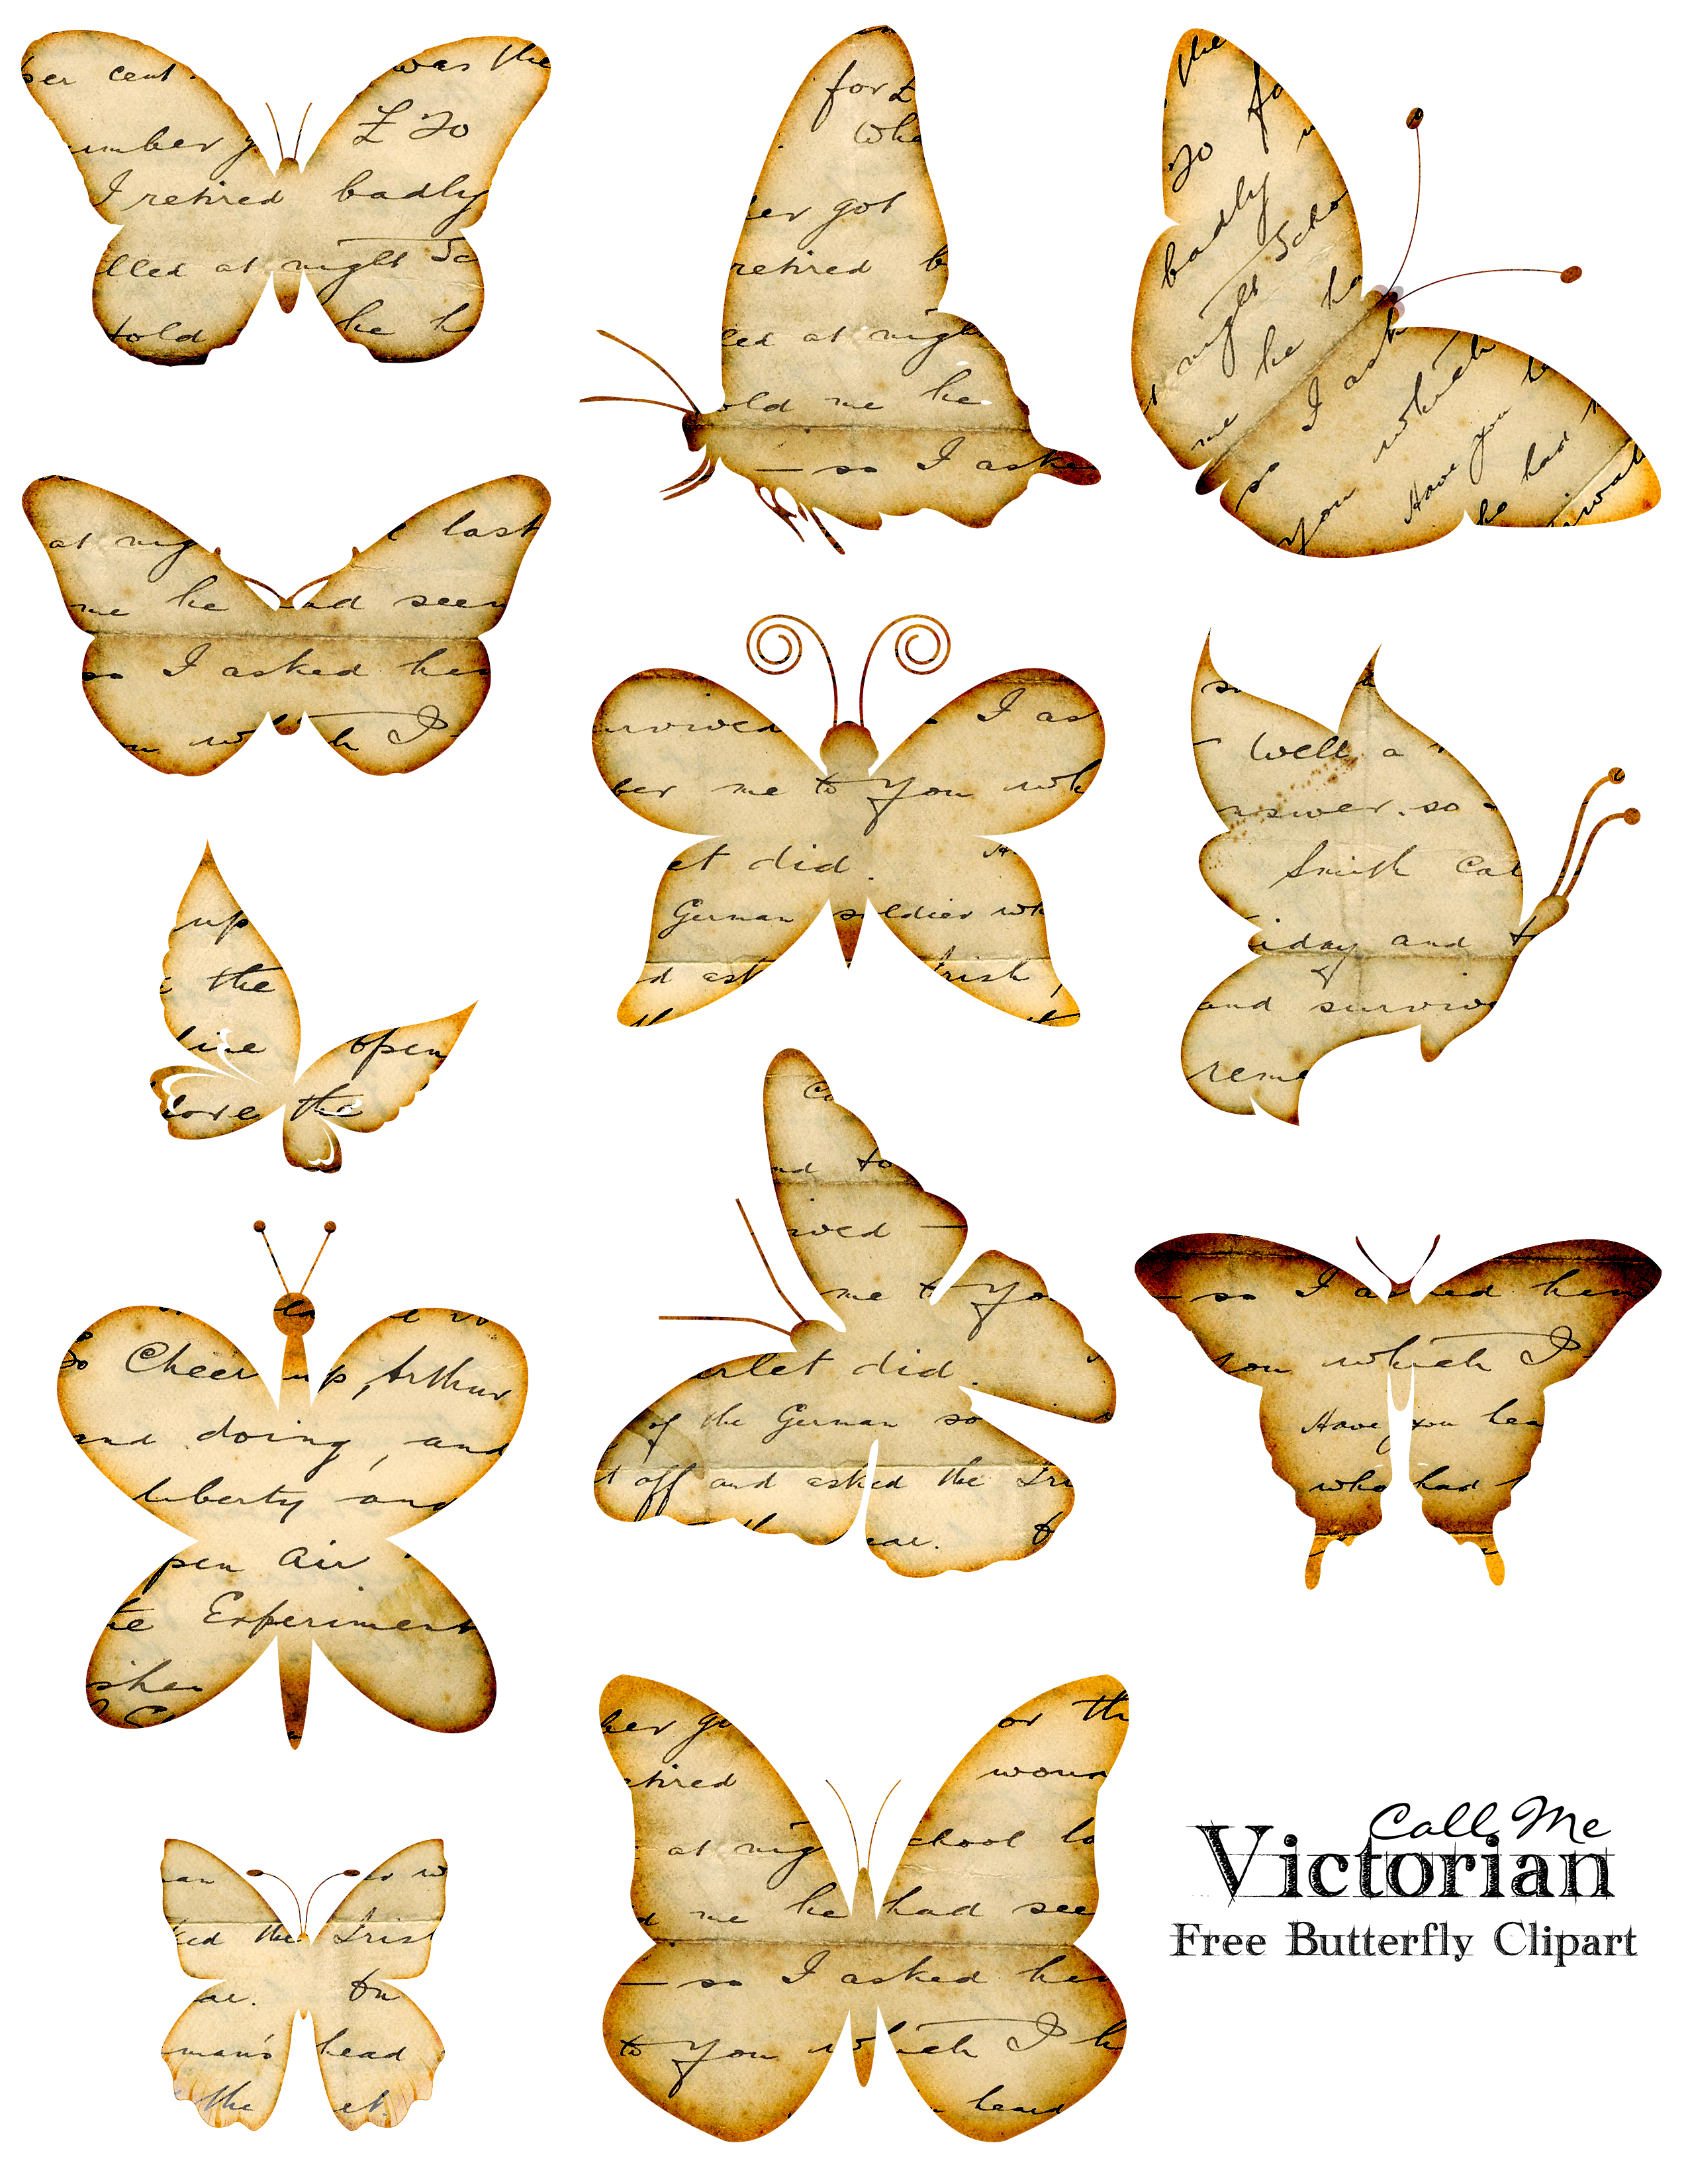 Steampunk clipart steampunk butterfly. Call me victorian offers